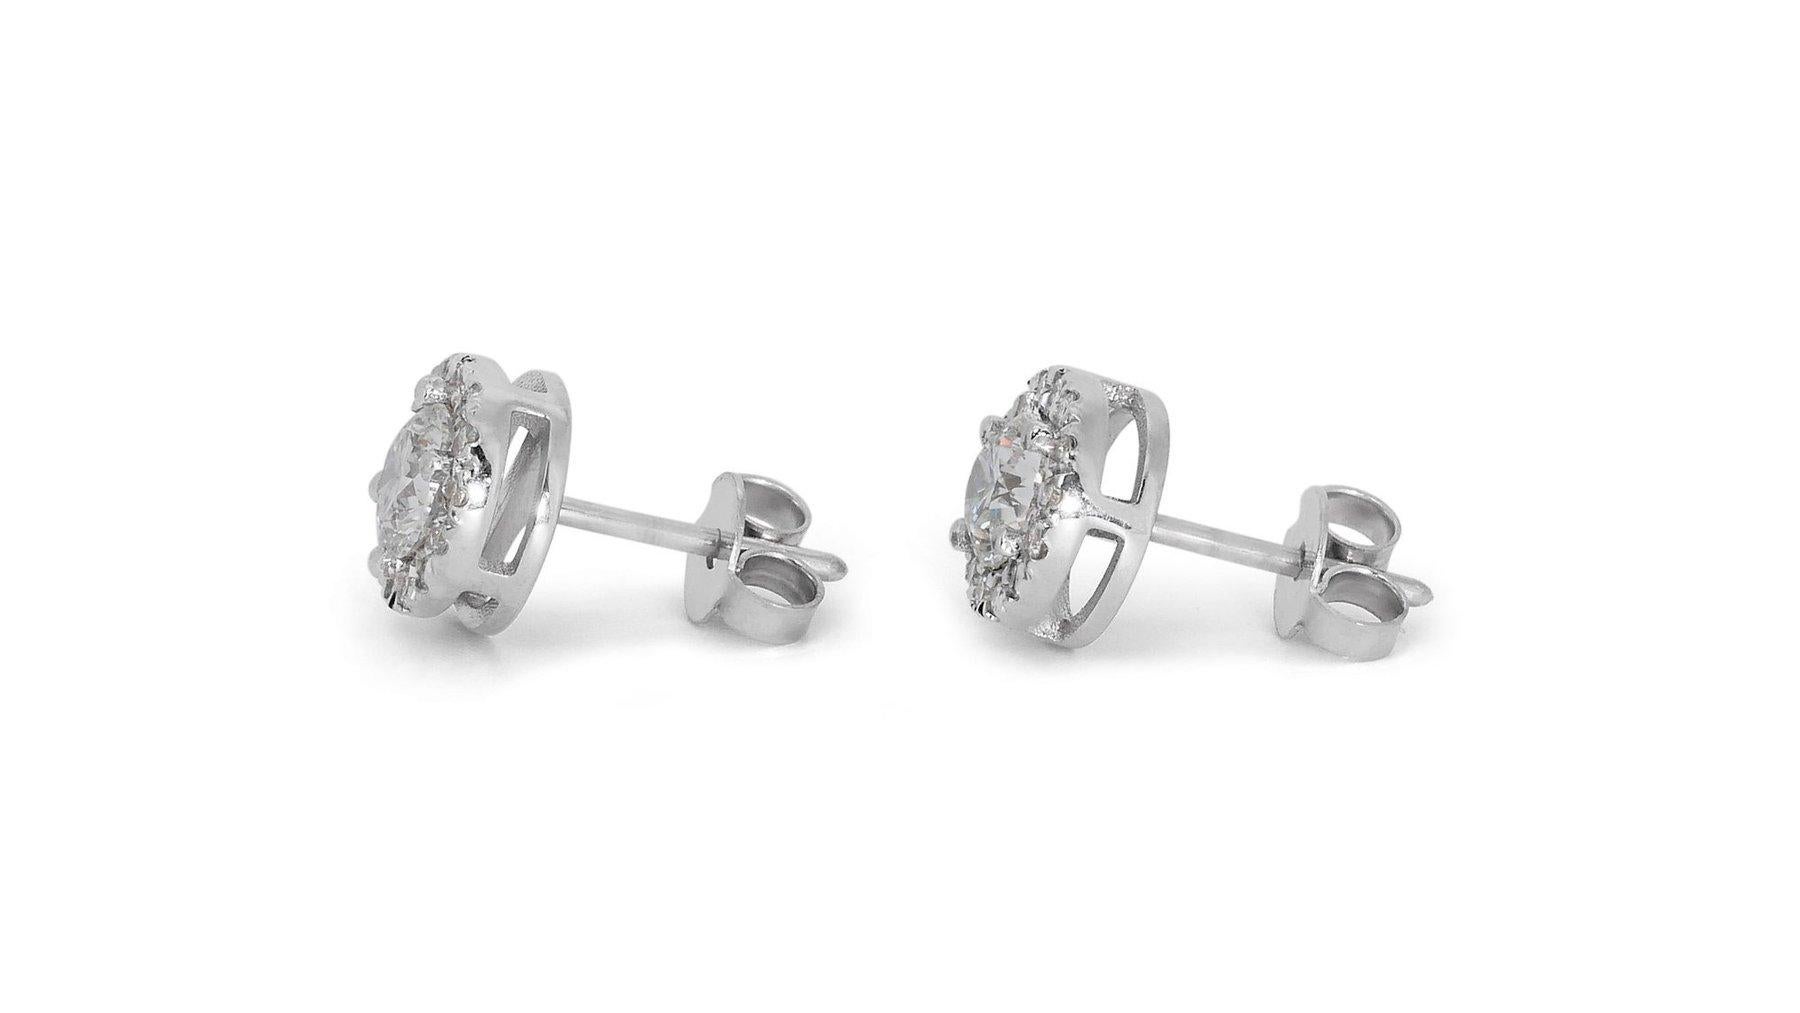 Dazzling 1.45ct Diamond Stud Earrings in 18k White Gold - GIA Certified For Sale 2